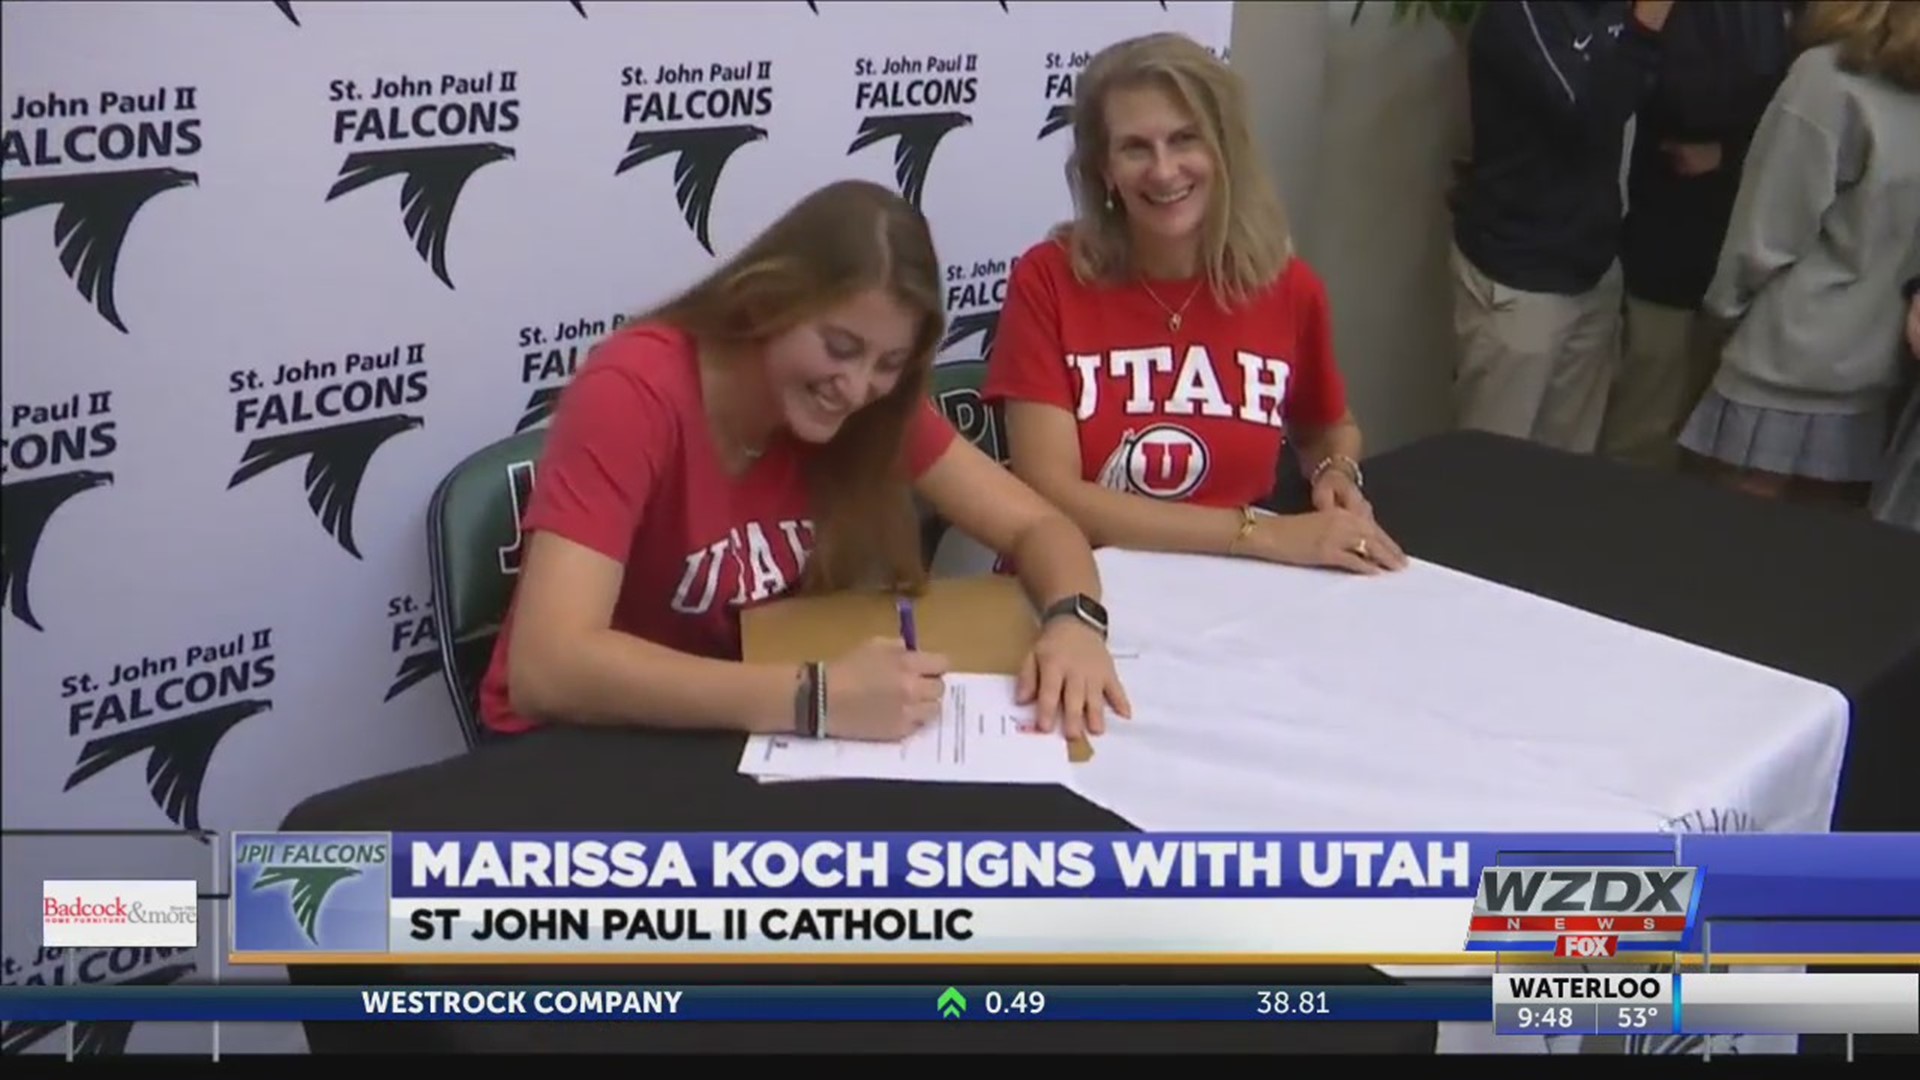 There was a huge celebration in the halls of St John Paul II Catholic High School on Friday. Volleyball standout Marissa Koch signed a national letter of intent with the Utah Utes of the Pac-12